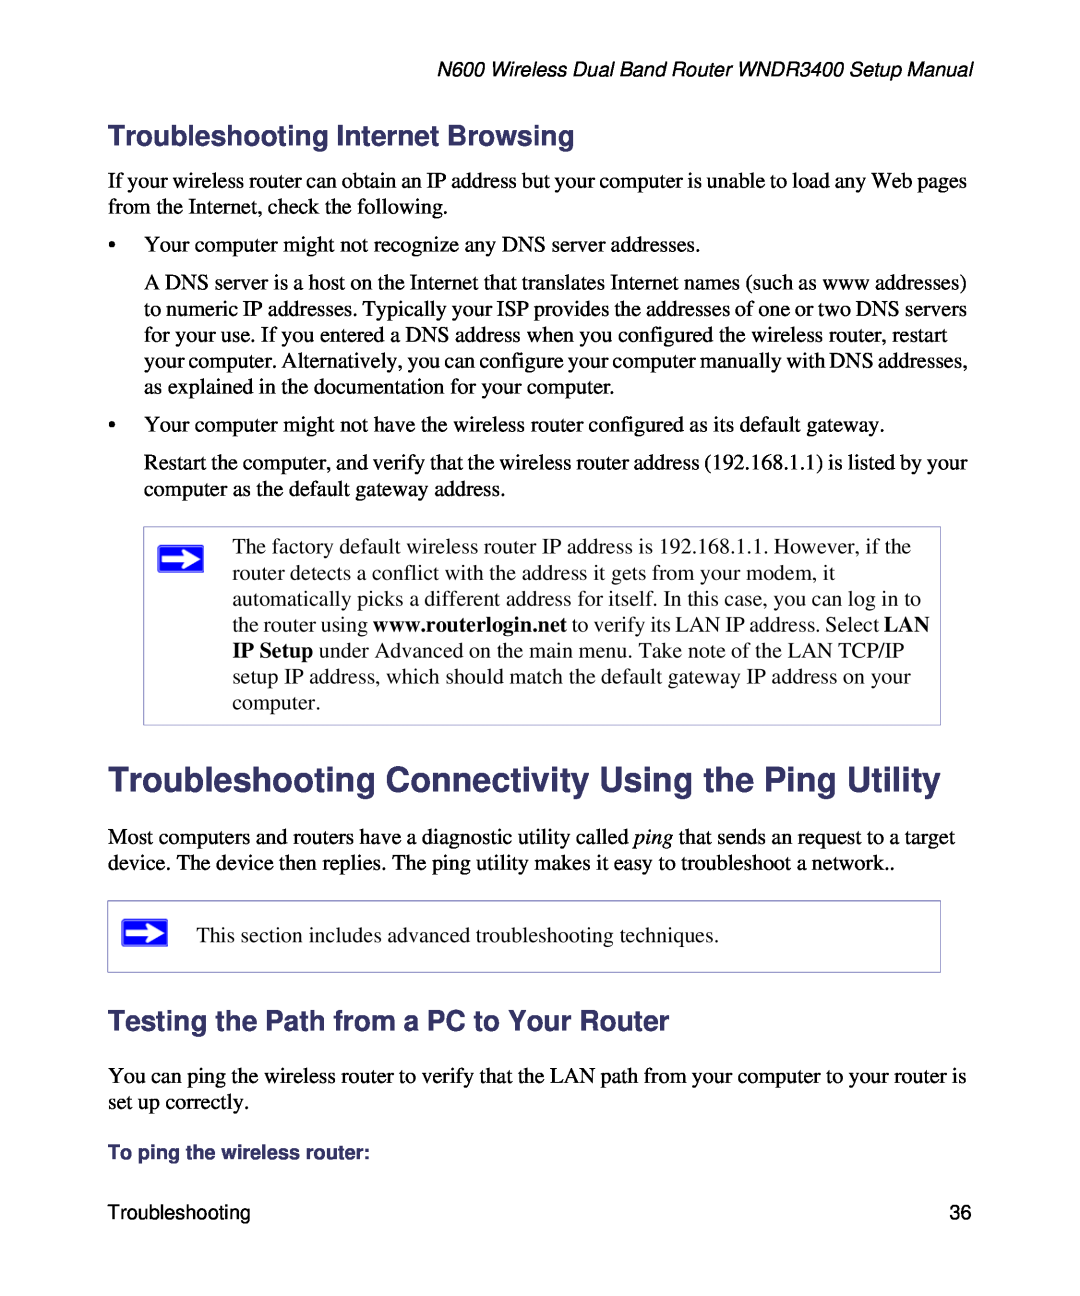 NETGEAR WNDR3400-100NAS manual Troubleshooting Connectivity Using the Ping Utility, Troubleshooting Internet Browsing 